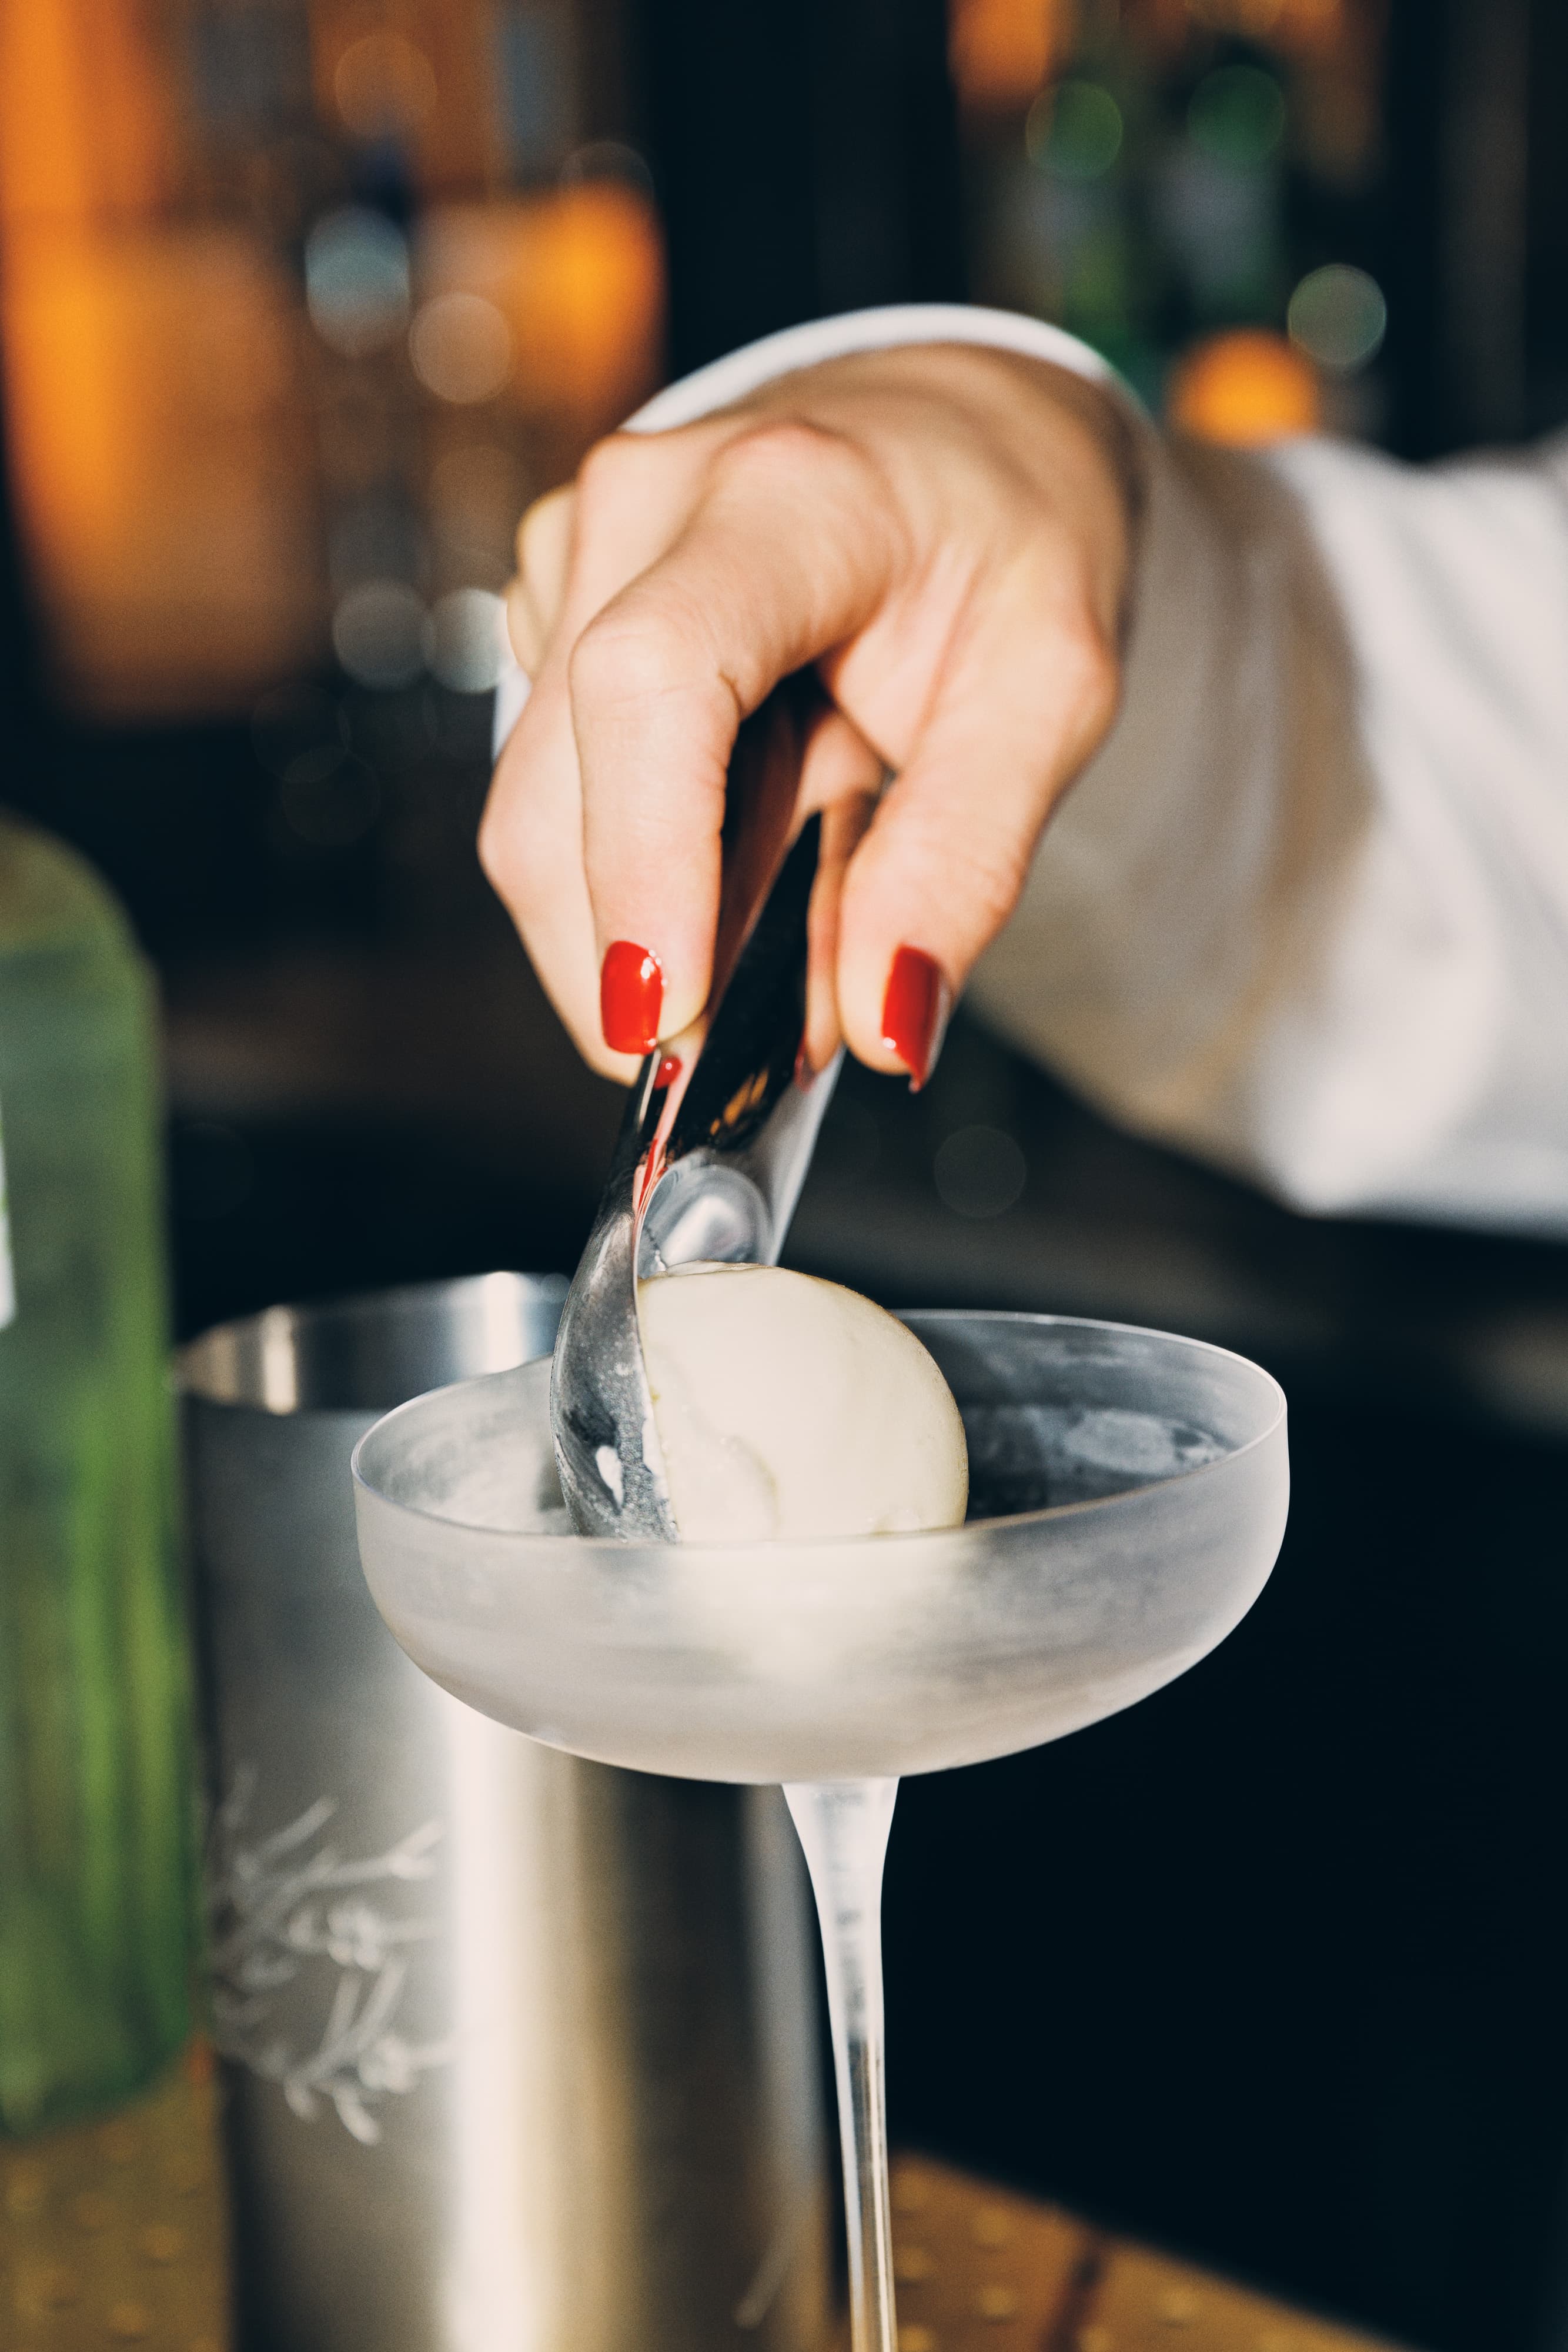 A hand is placing a scoop of lime sorbet into a chilled glass.